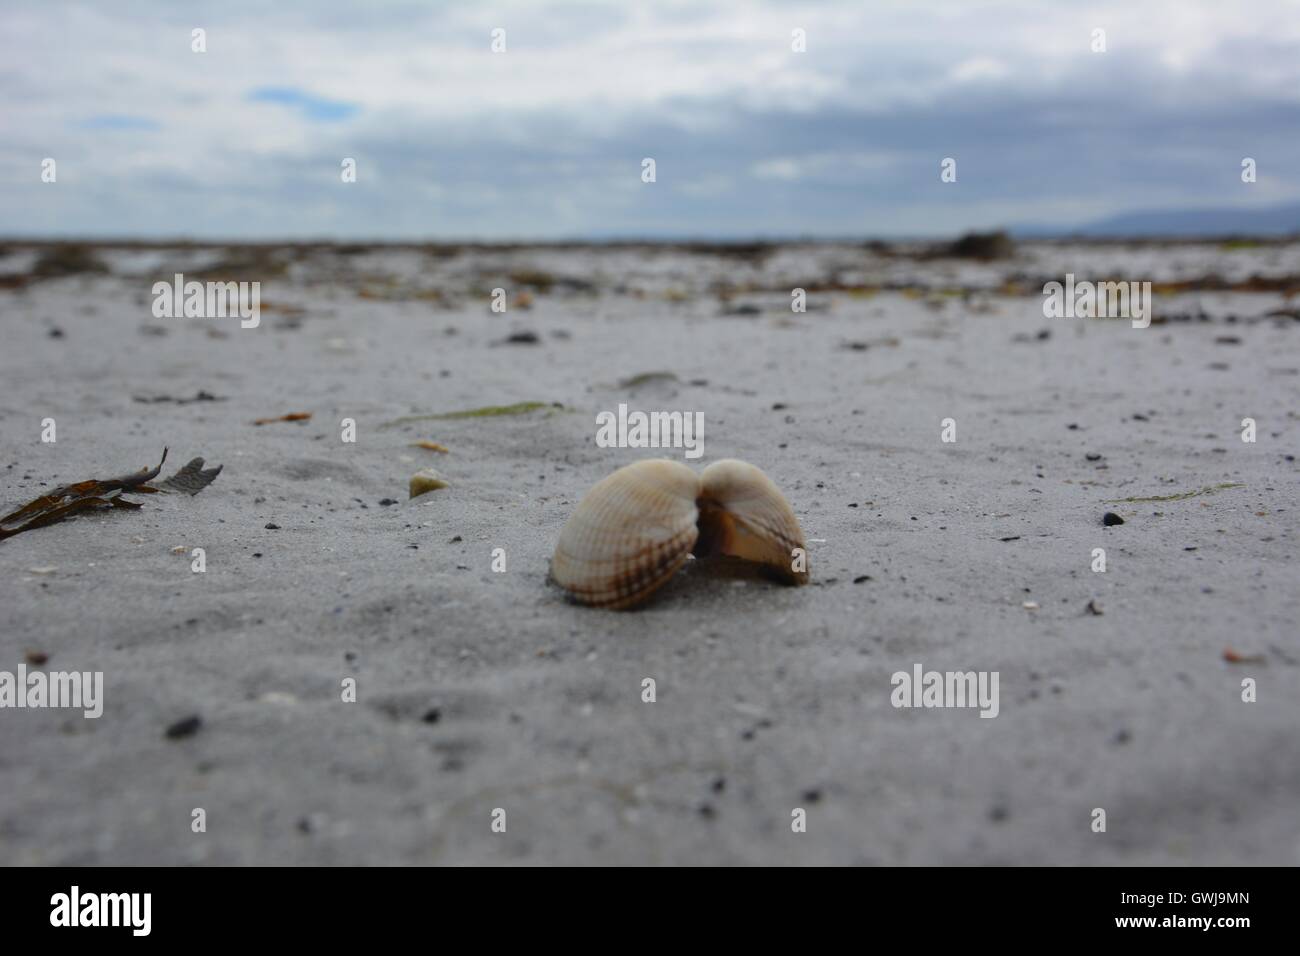 Two Shells Kissing in the Sand Stock Photo